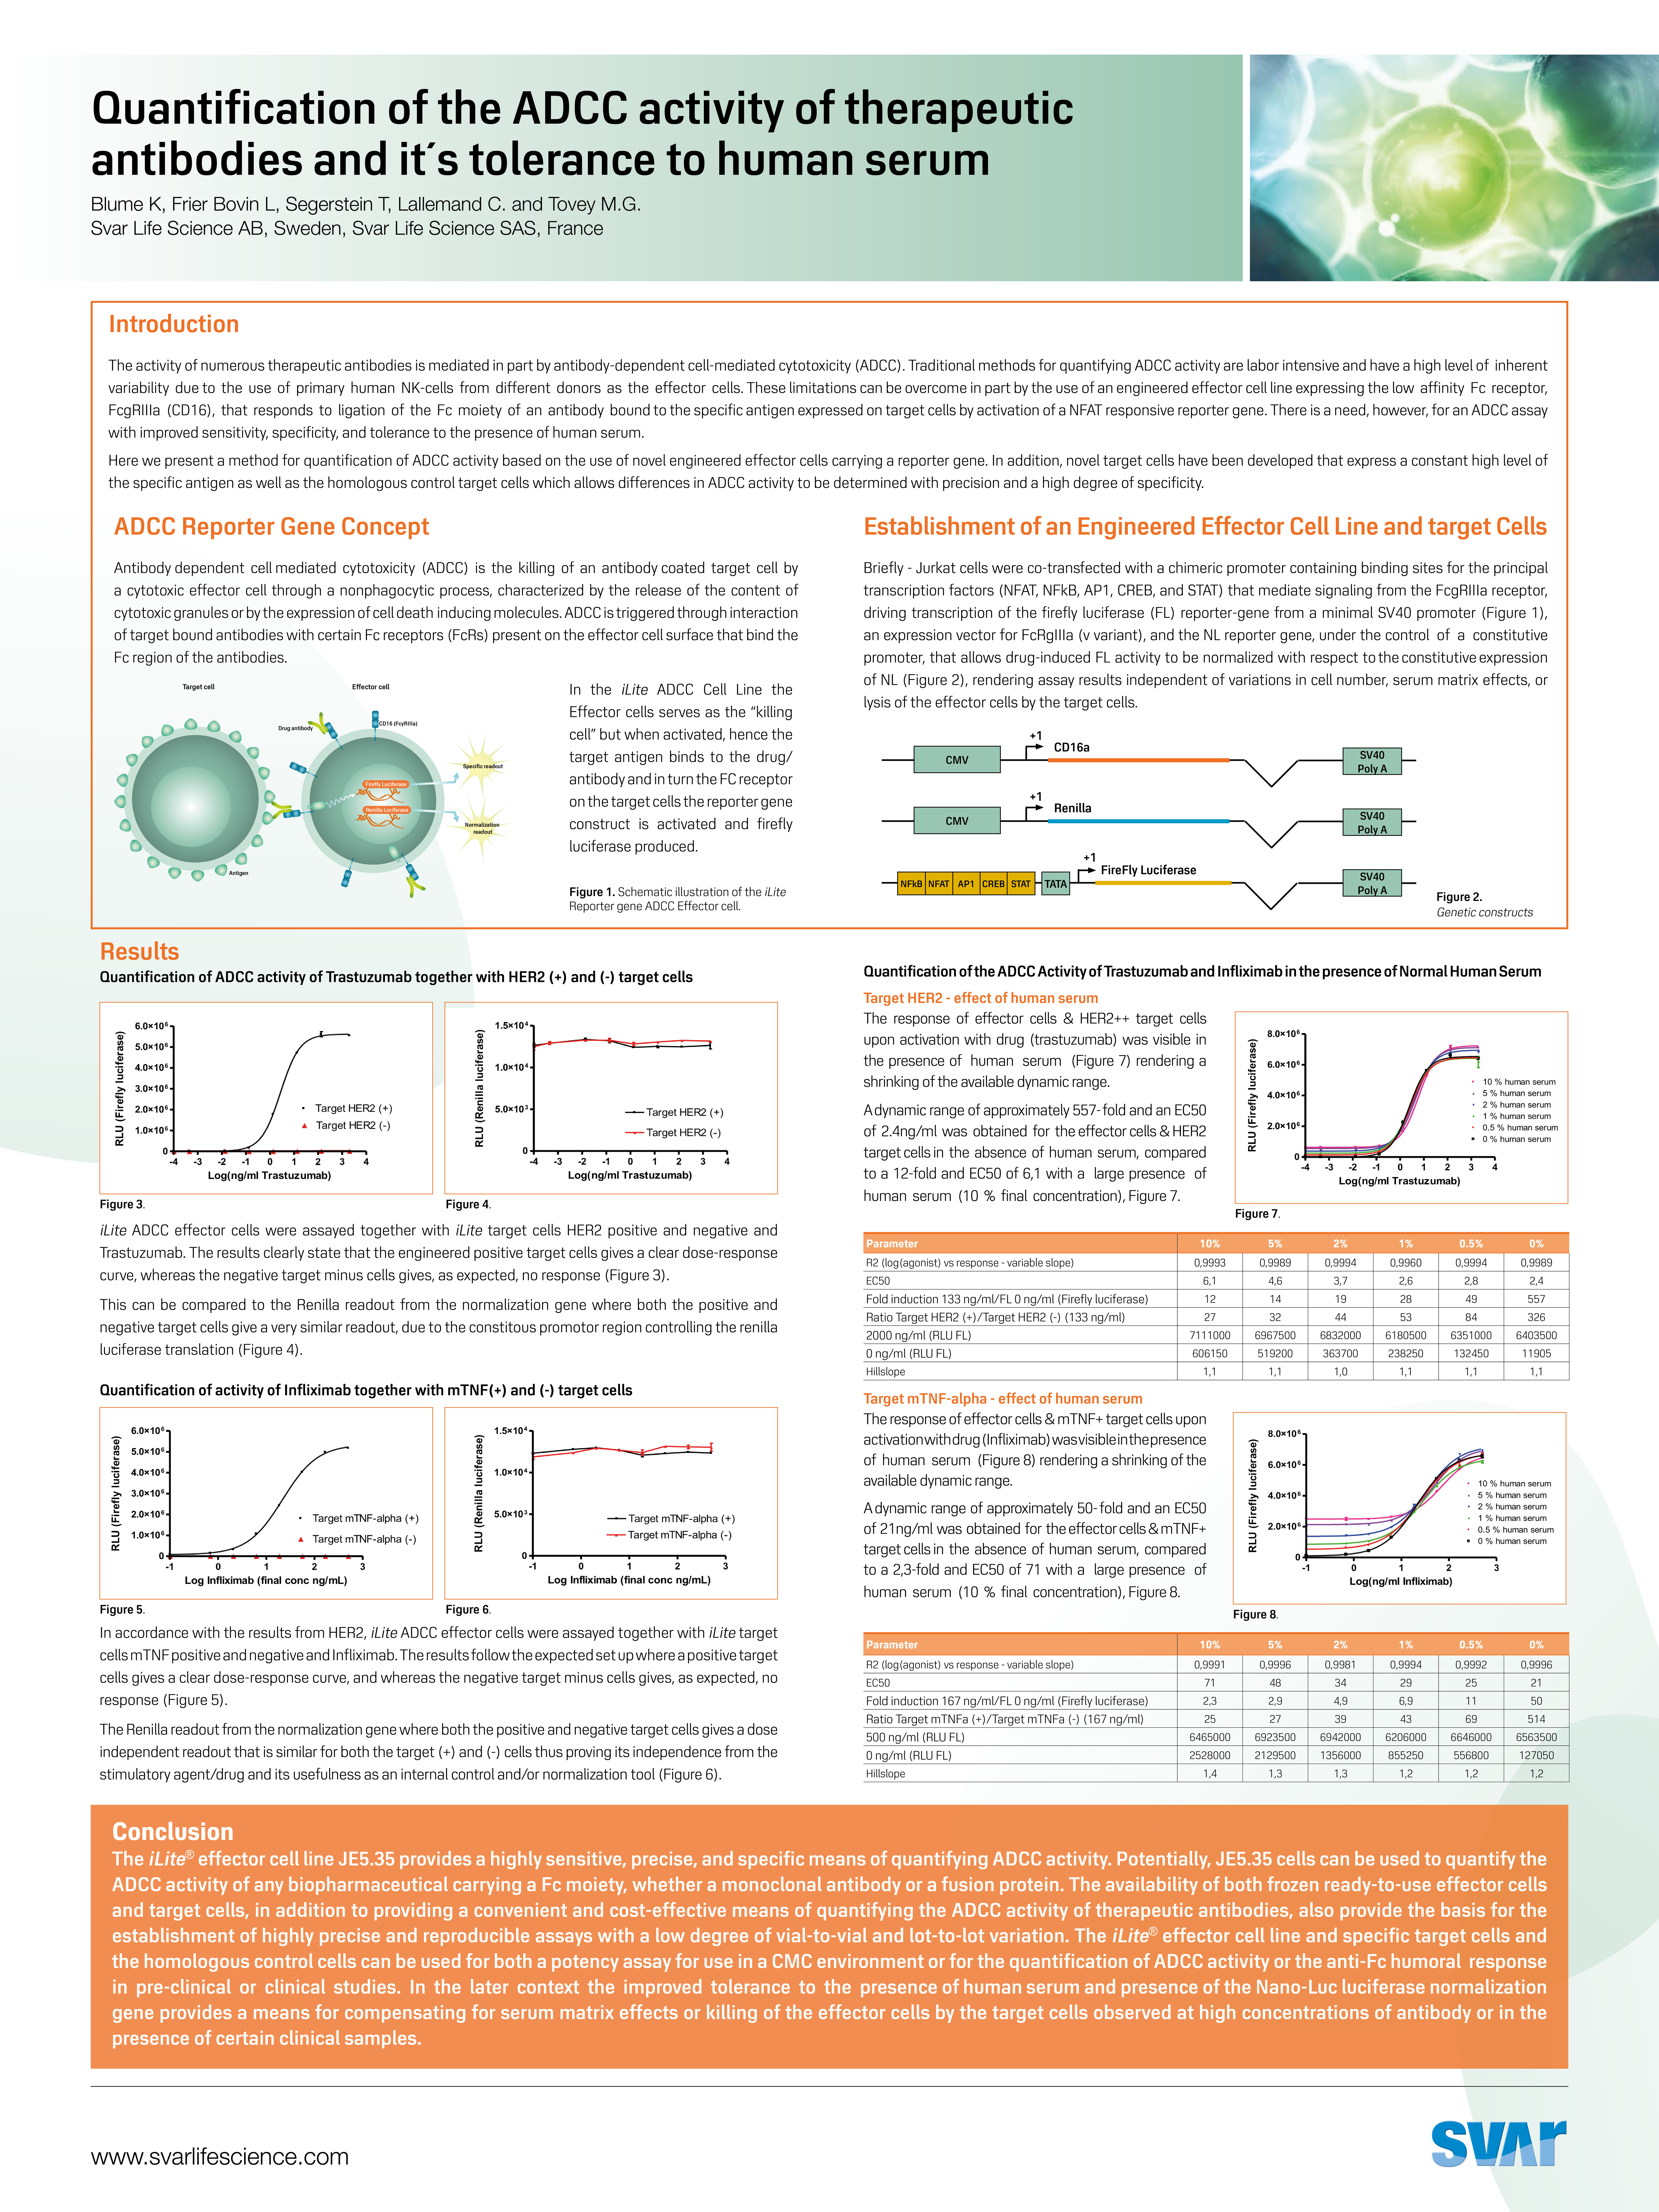 Scientific Poster: Quantification of ADCC activity of therapeutic antibodies and tolerance to human serum